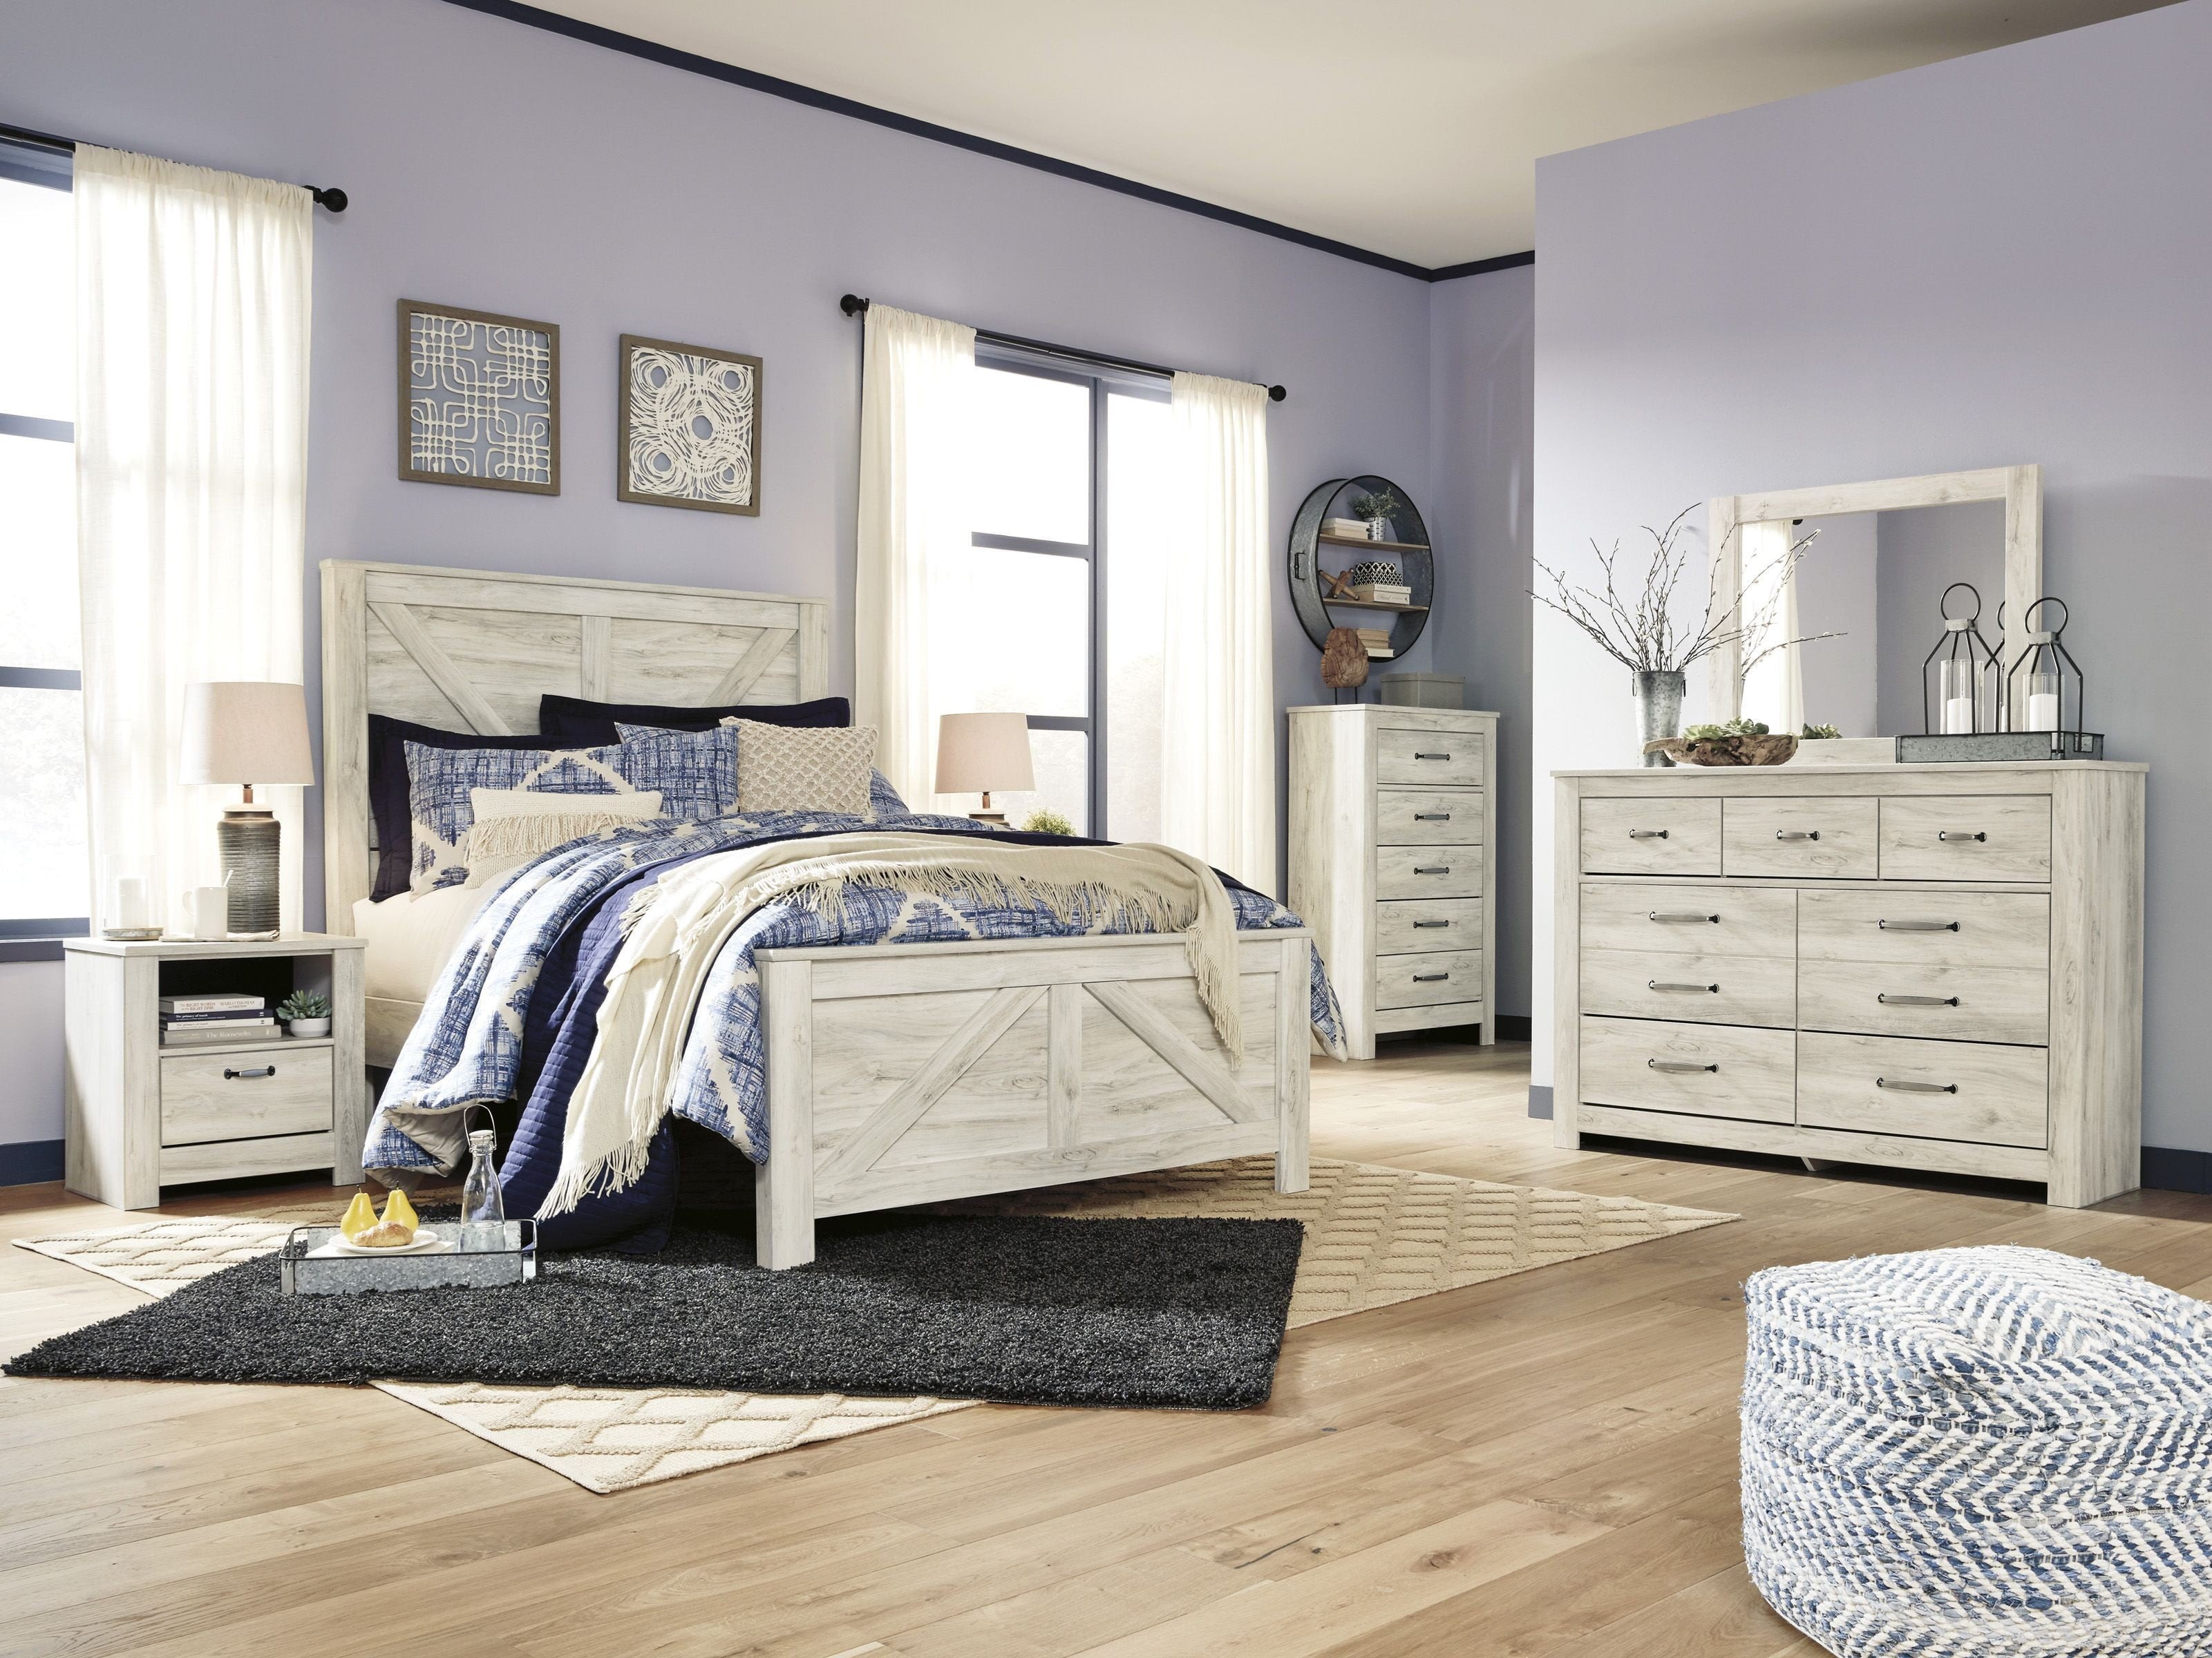 White Washed Bedroom Furniture Awesome Bellaby Whitewash Panel Bedroom Set Of White Washed Bedroom Furniture 